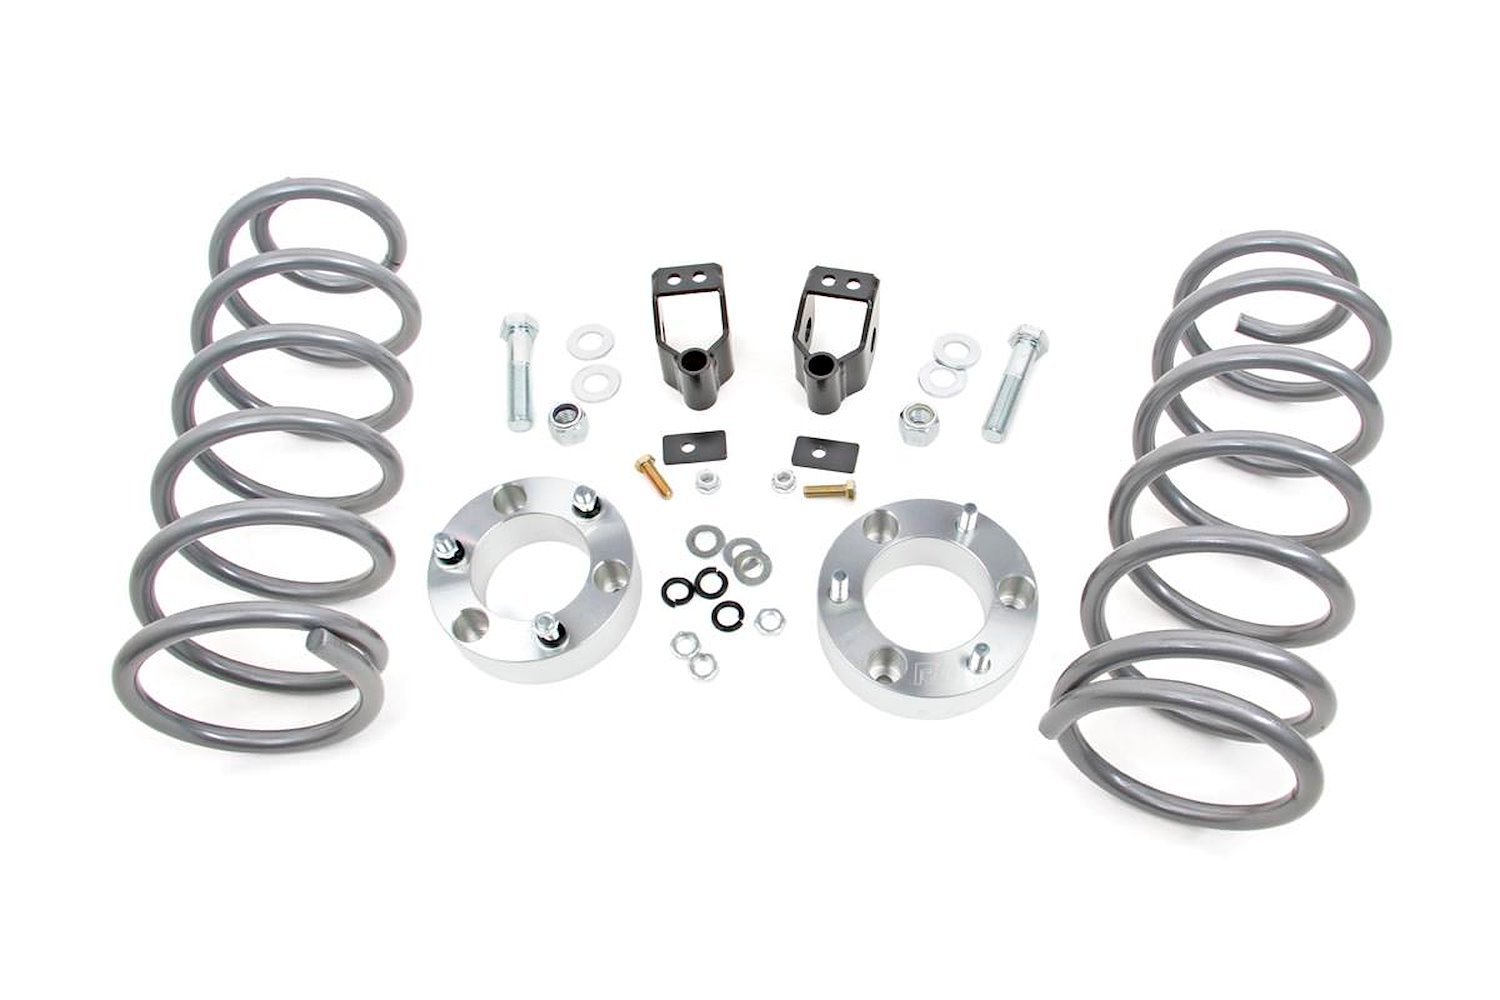 761 3-inch X-REAS Series II Suspension Lift System